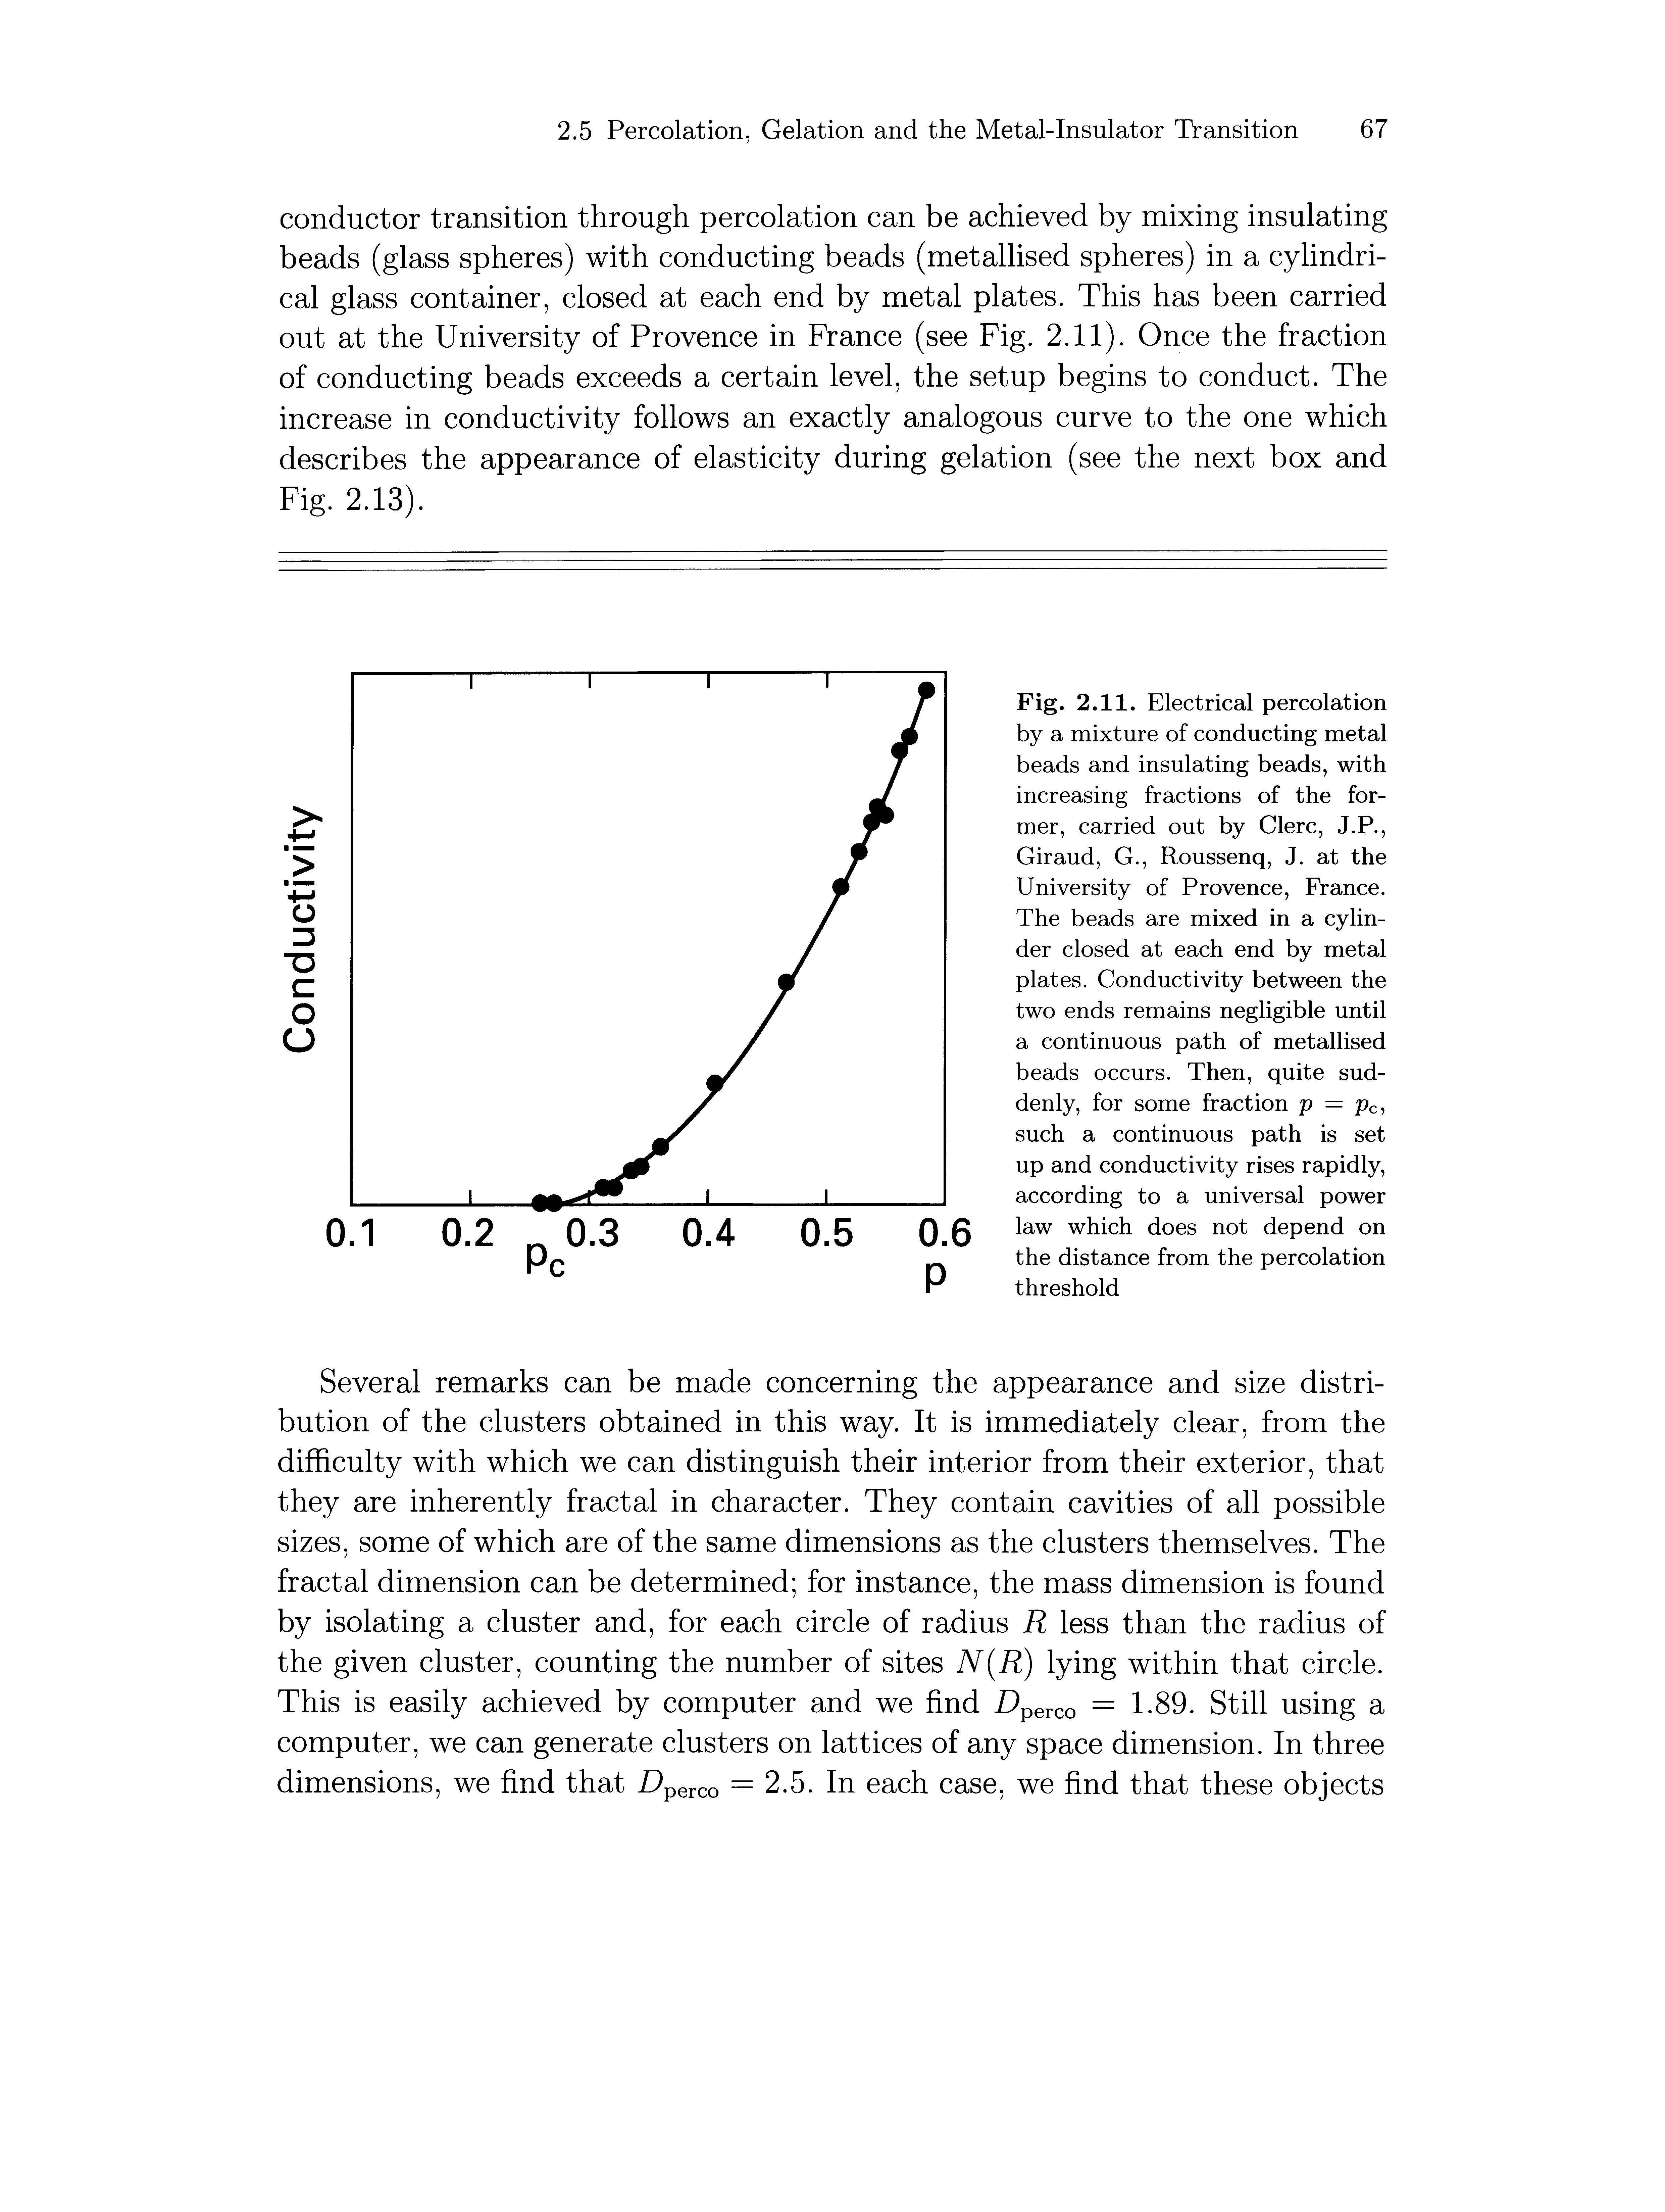 Fig. 2.11. Electrical percolation by a mixture of conducting metal beads and insulating beads, with increasing fractions of the former, carried out by Clerc, J.P., Giraud, G., Roussenq, J. at the University of Provence, Prance. The beads are mixed in a cylinder closed at each end by metal plates. Conductivity between the two ends remains negligible until a continuous path of metallised beads occurs. Then, quite suddenly, for some fraction p = pc, such a continuous path is set up and conductivity rises rapidly, according to a universal power law which does not depend on the distance from the percolation threshold...